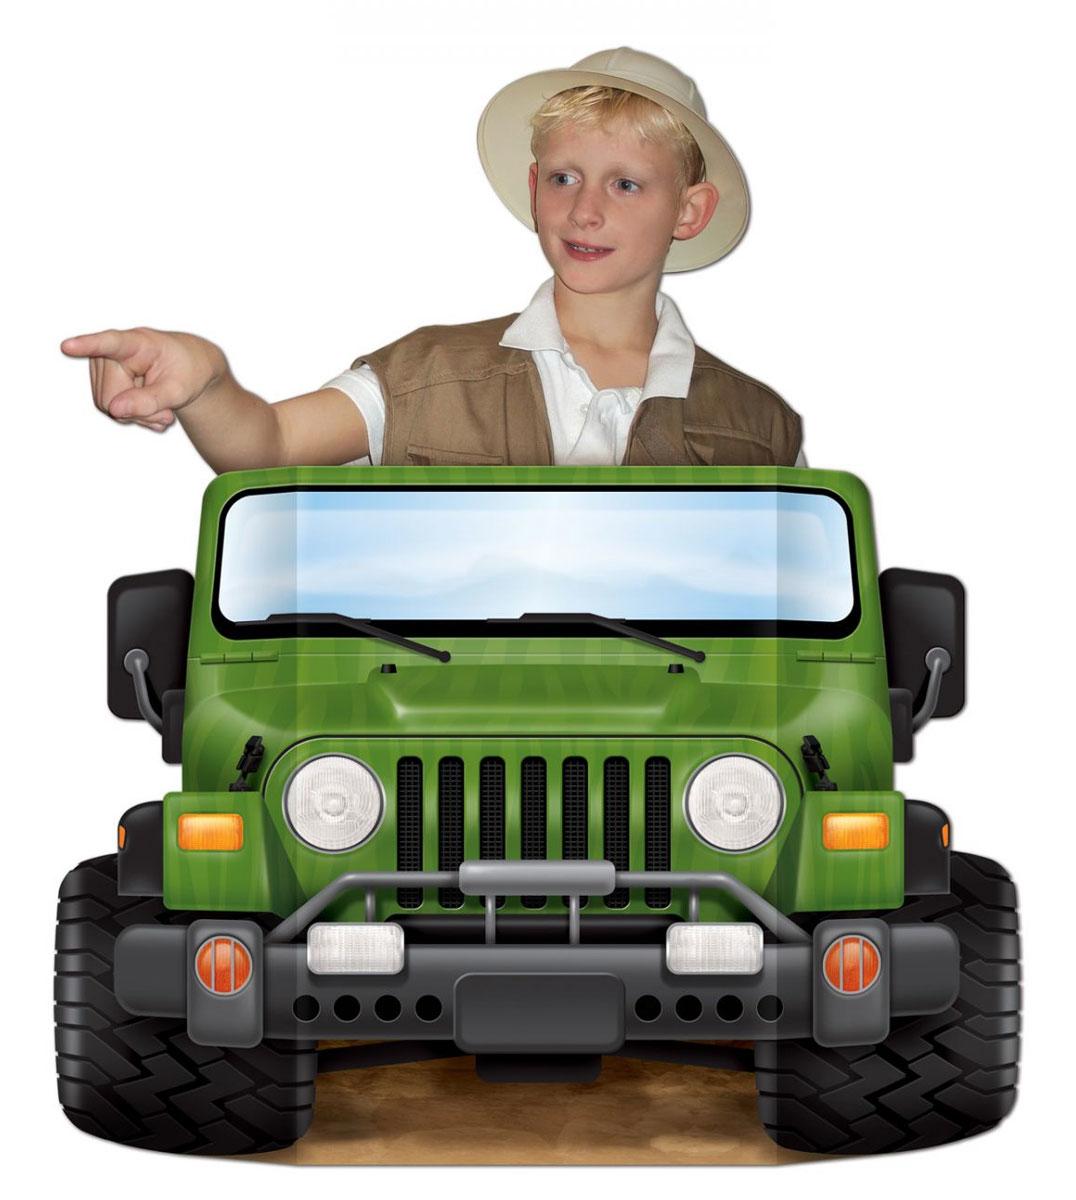 Safari Photo Prop - 37" x  25" by Beistle 57573 available here at Karnival Costumes online party shop